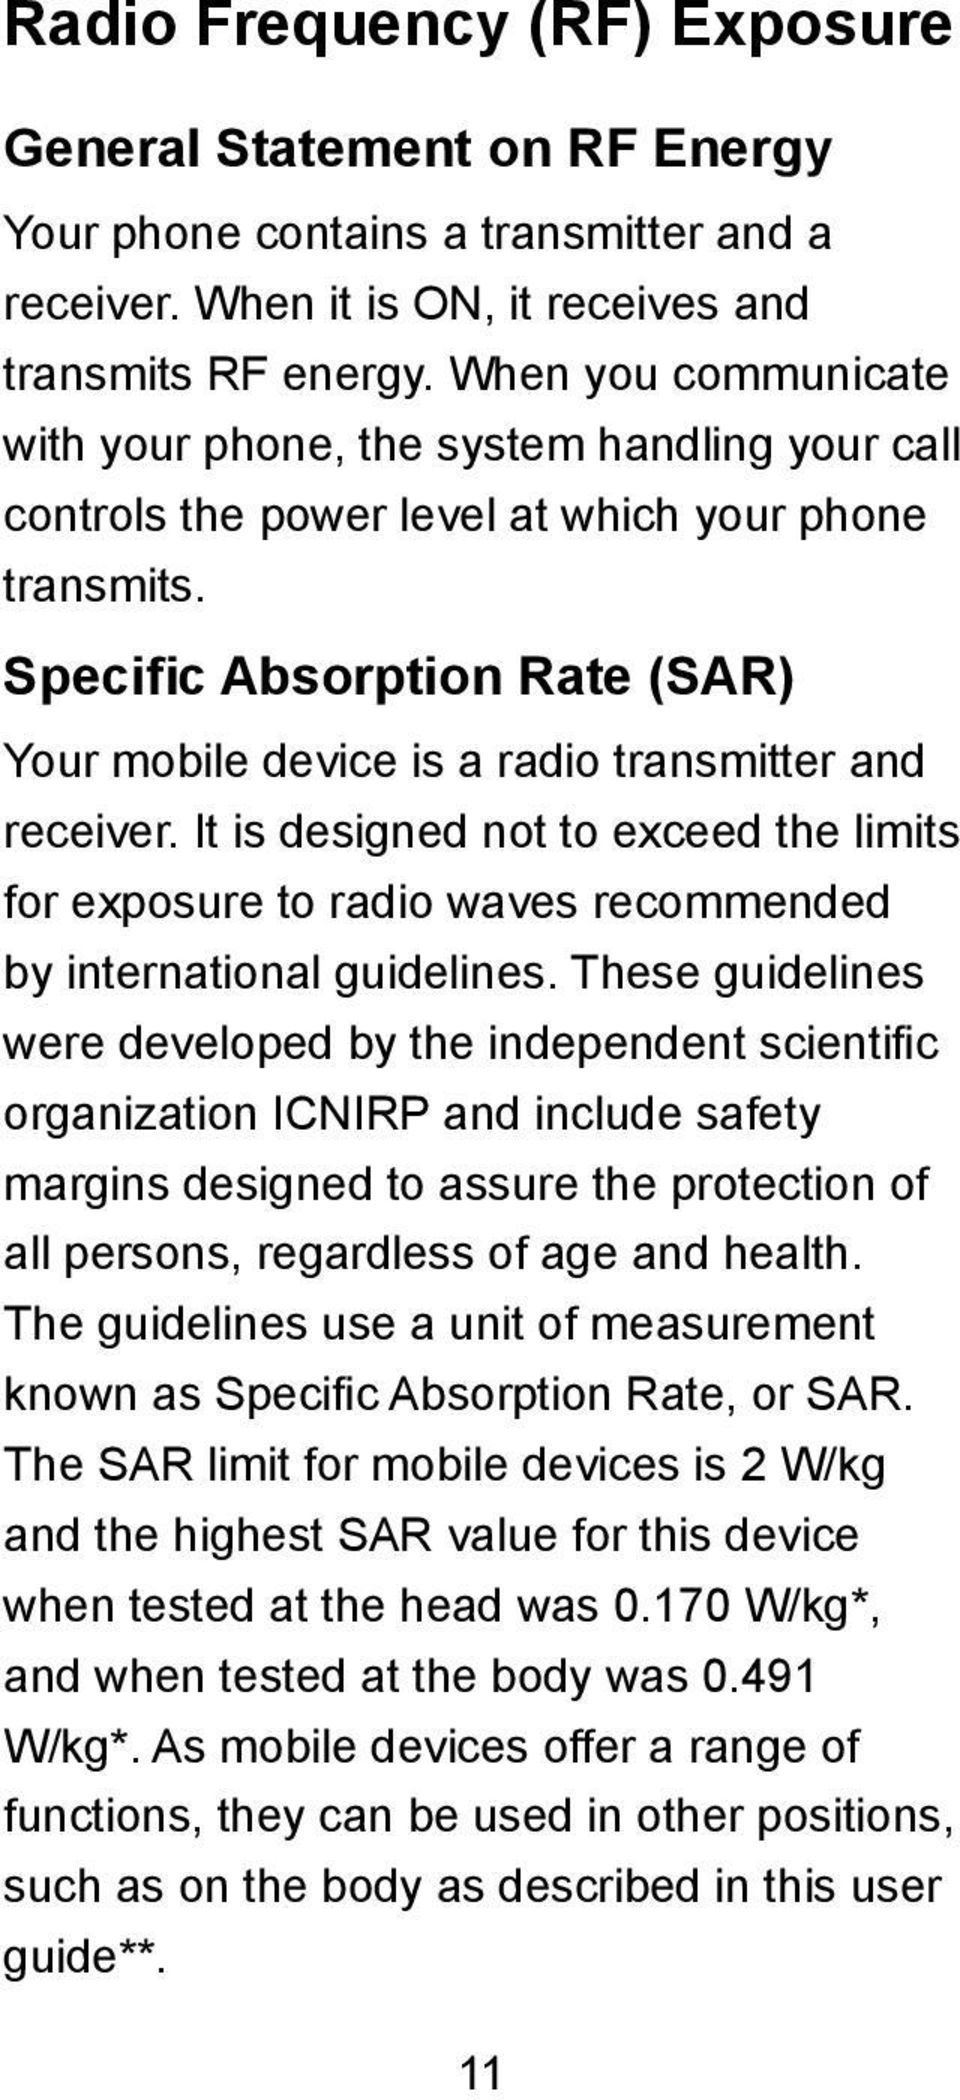 Specific Absorption Rate (SAR) Your mobile device is a radio transmitter and receiver. It is designed not to exceed the limits for exposure to radio waves recommended by international guidelines.